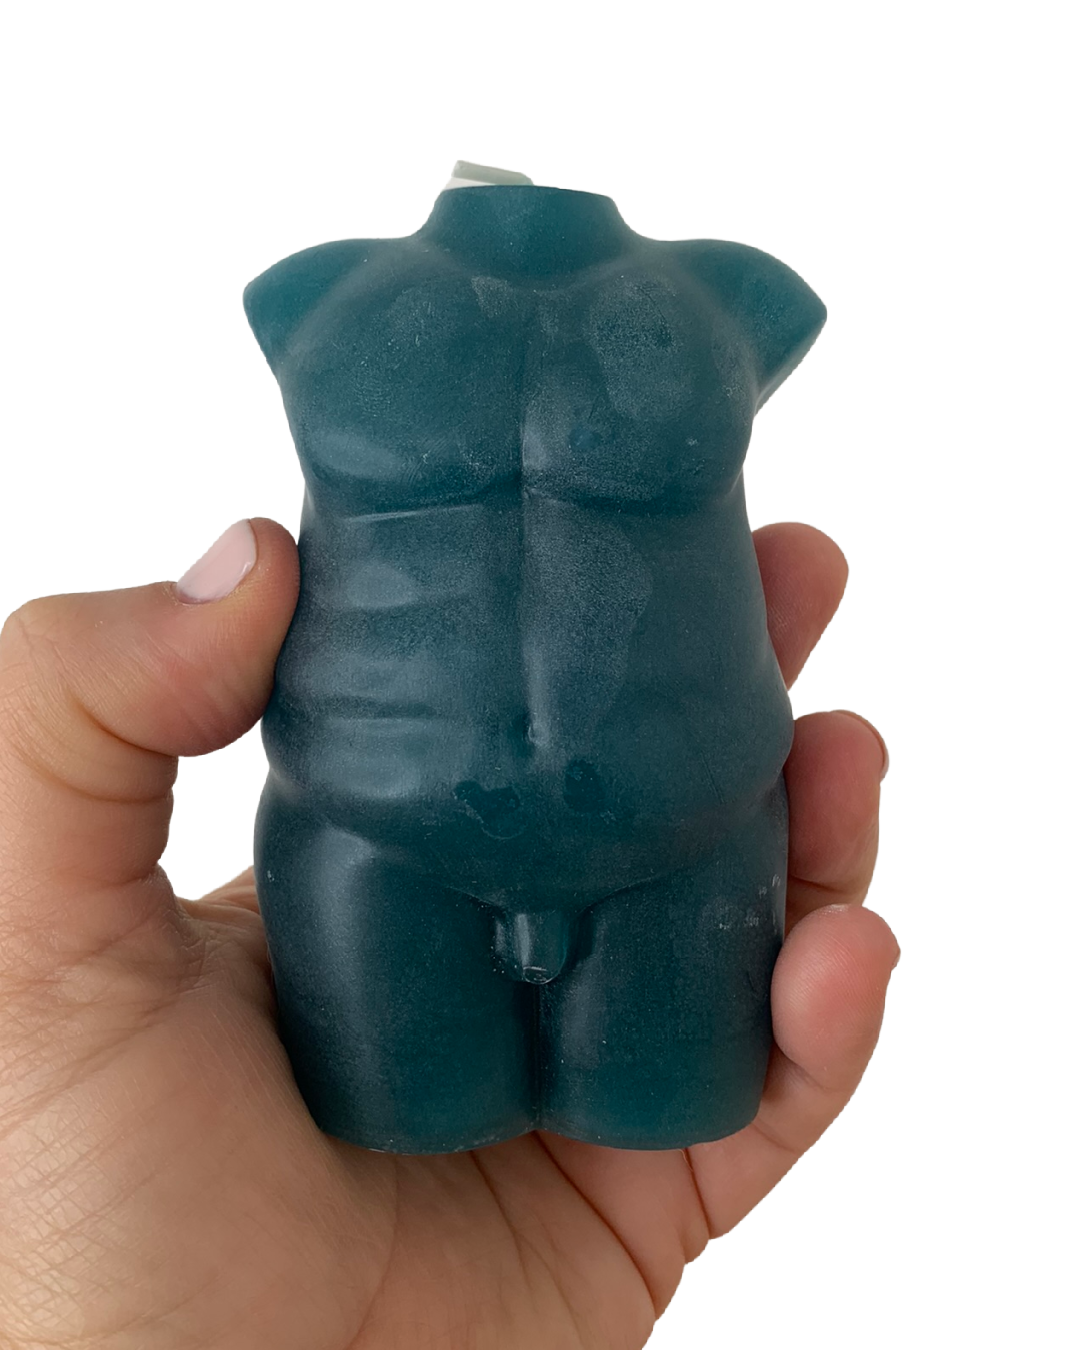 Lacire Torso Form 2 Drip Candles held in hand